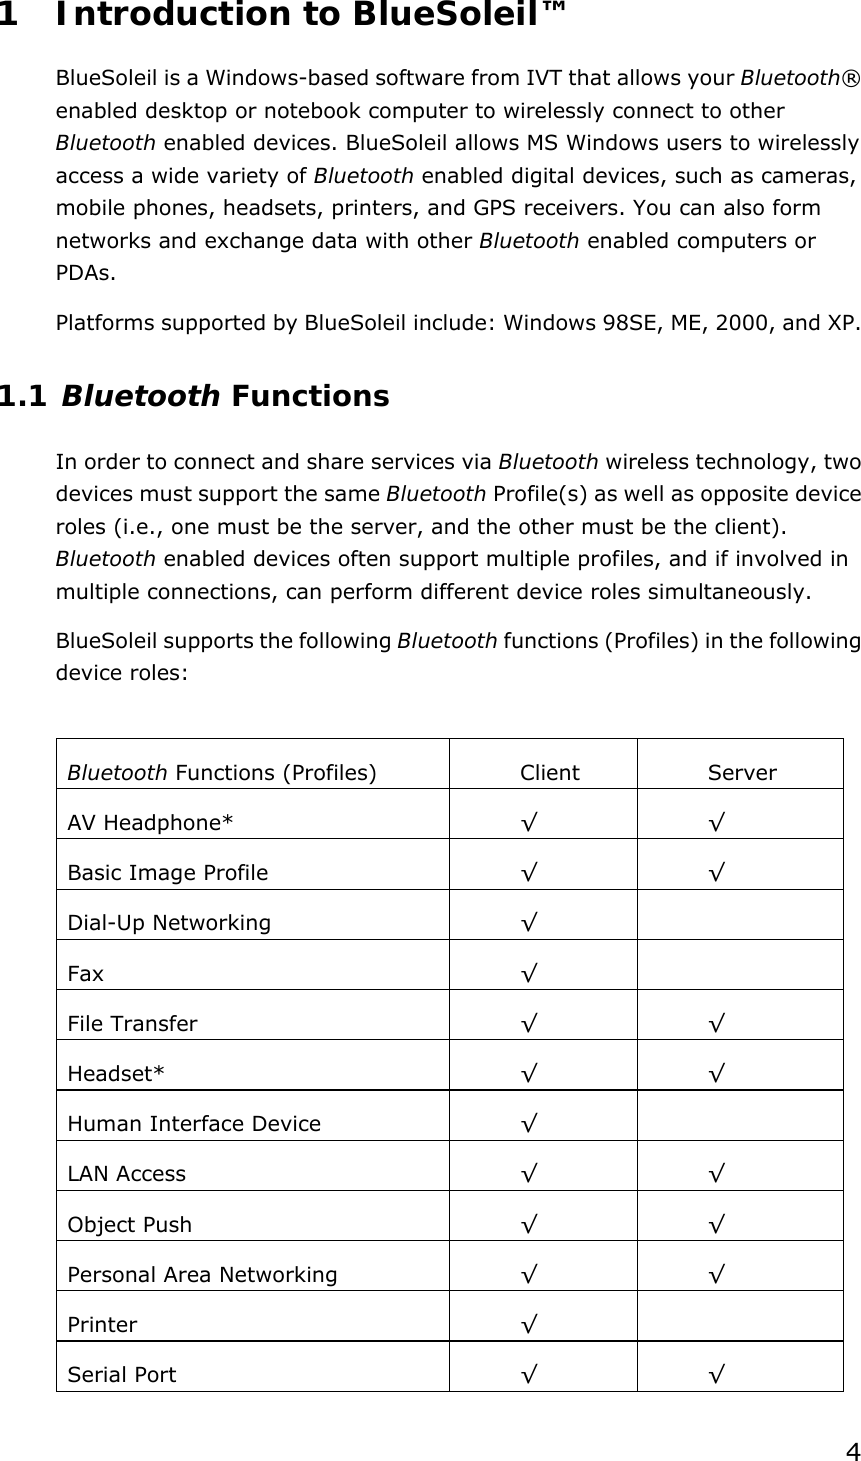  41 Introduction to BlueSoleil™ BlueSoleil is a Windows-based software from IVT that allows your Bluetooth® enabled desktop or notebook computer to wirelessly connect to other Bluetooth enabled devices. BlueSoleil allows MS Windows users to wirelessly access a wide variety of Bluetooth enabled digital devices, such as cameras, mobile phones, headsets, printers, and GPS receivers. You can also form networks and exchange data with other Bluetooth enabled computers or PDAs. Platforms supported by BlueSoleil include: Windows 98SE, ME, 2000, and XP. 1.1 Bluetooth Functions In order to connect and share services via Bluetooth wireless technology, two devices must support the same Bluetooth Profile(s) as well as opposite device roles (i.e., one must be the server, and the other must be the client). Bluetooth enabled devices often support multiple profiles, and if involved in multiple connections, can perform different device roles simultaneously. BlueSoleil supports the following Bluetooth functions (Profiles) in the following device roles:  Bluetooth Functions (Profiles)  Client  Server AV Headphone*  √ √ Basic Image Profile  √ √ Dial-Up Networking  √  Fax  √  File Transfer  √ √ Headset*  √ √ Human Interface Device  √  LAN Access  √ √ Object Push  √ √ Personal Area Networking  √ √ Printer  √  Serial Port  √ √ 